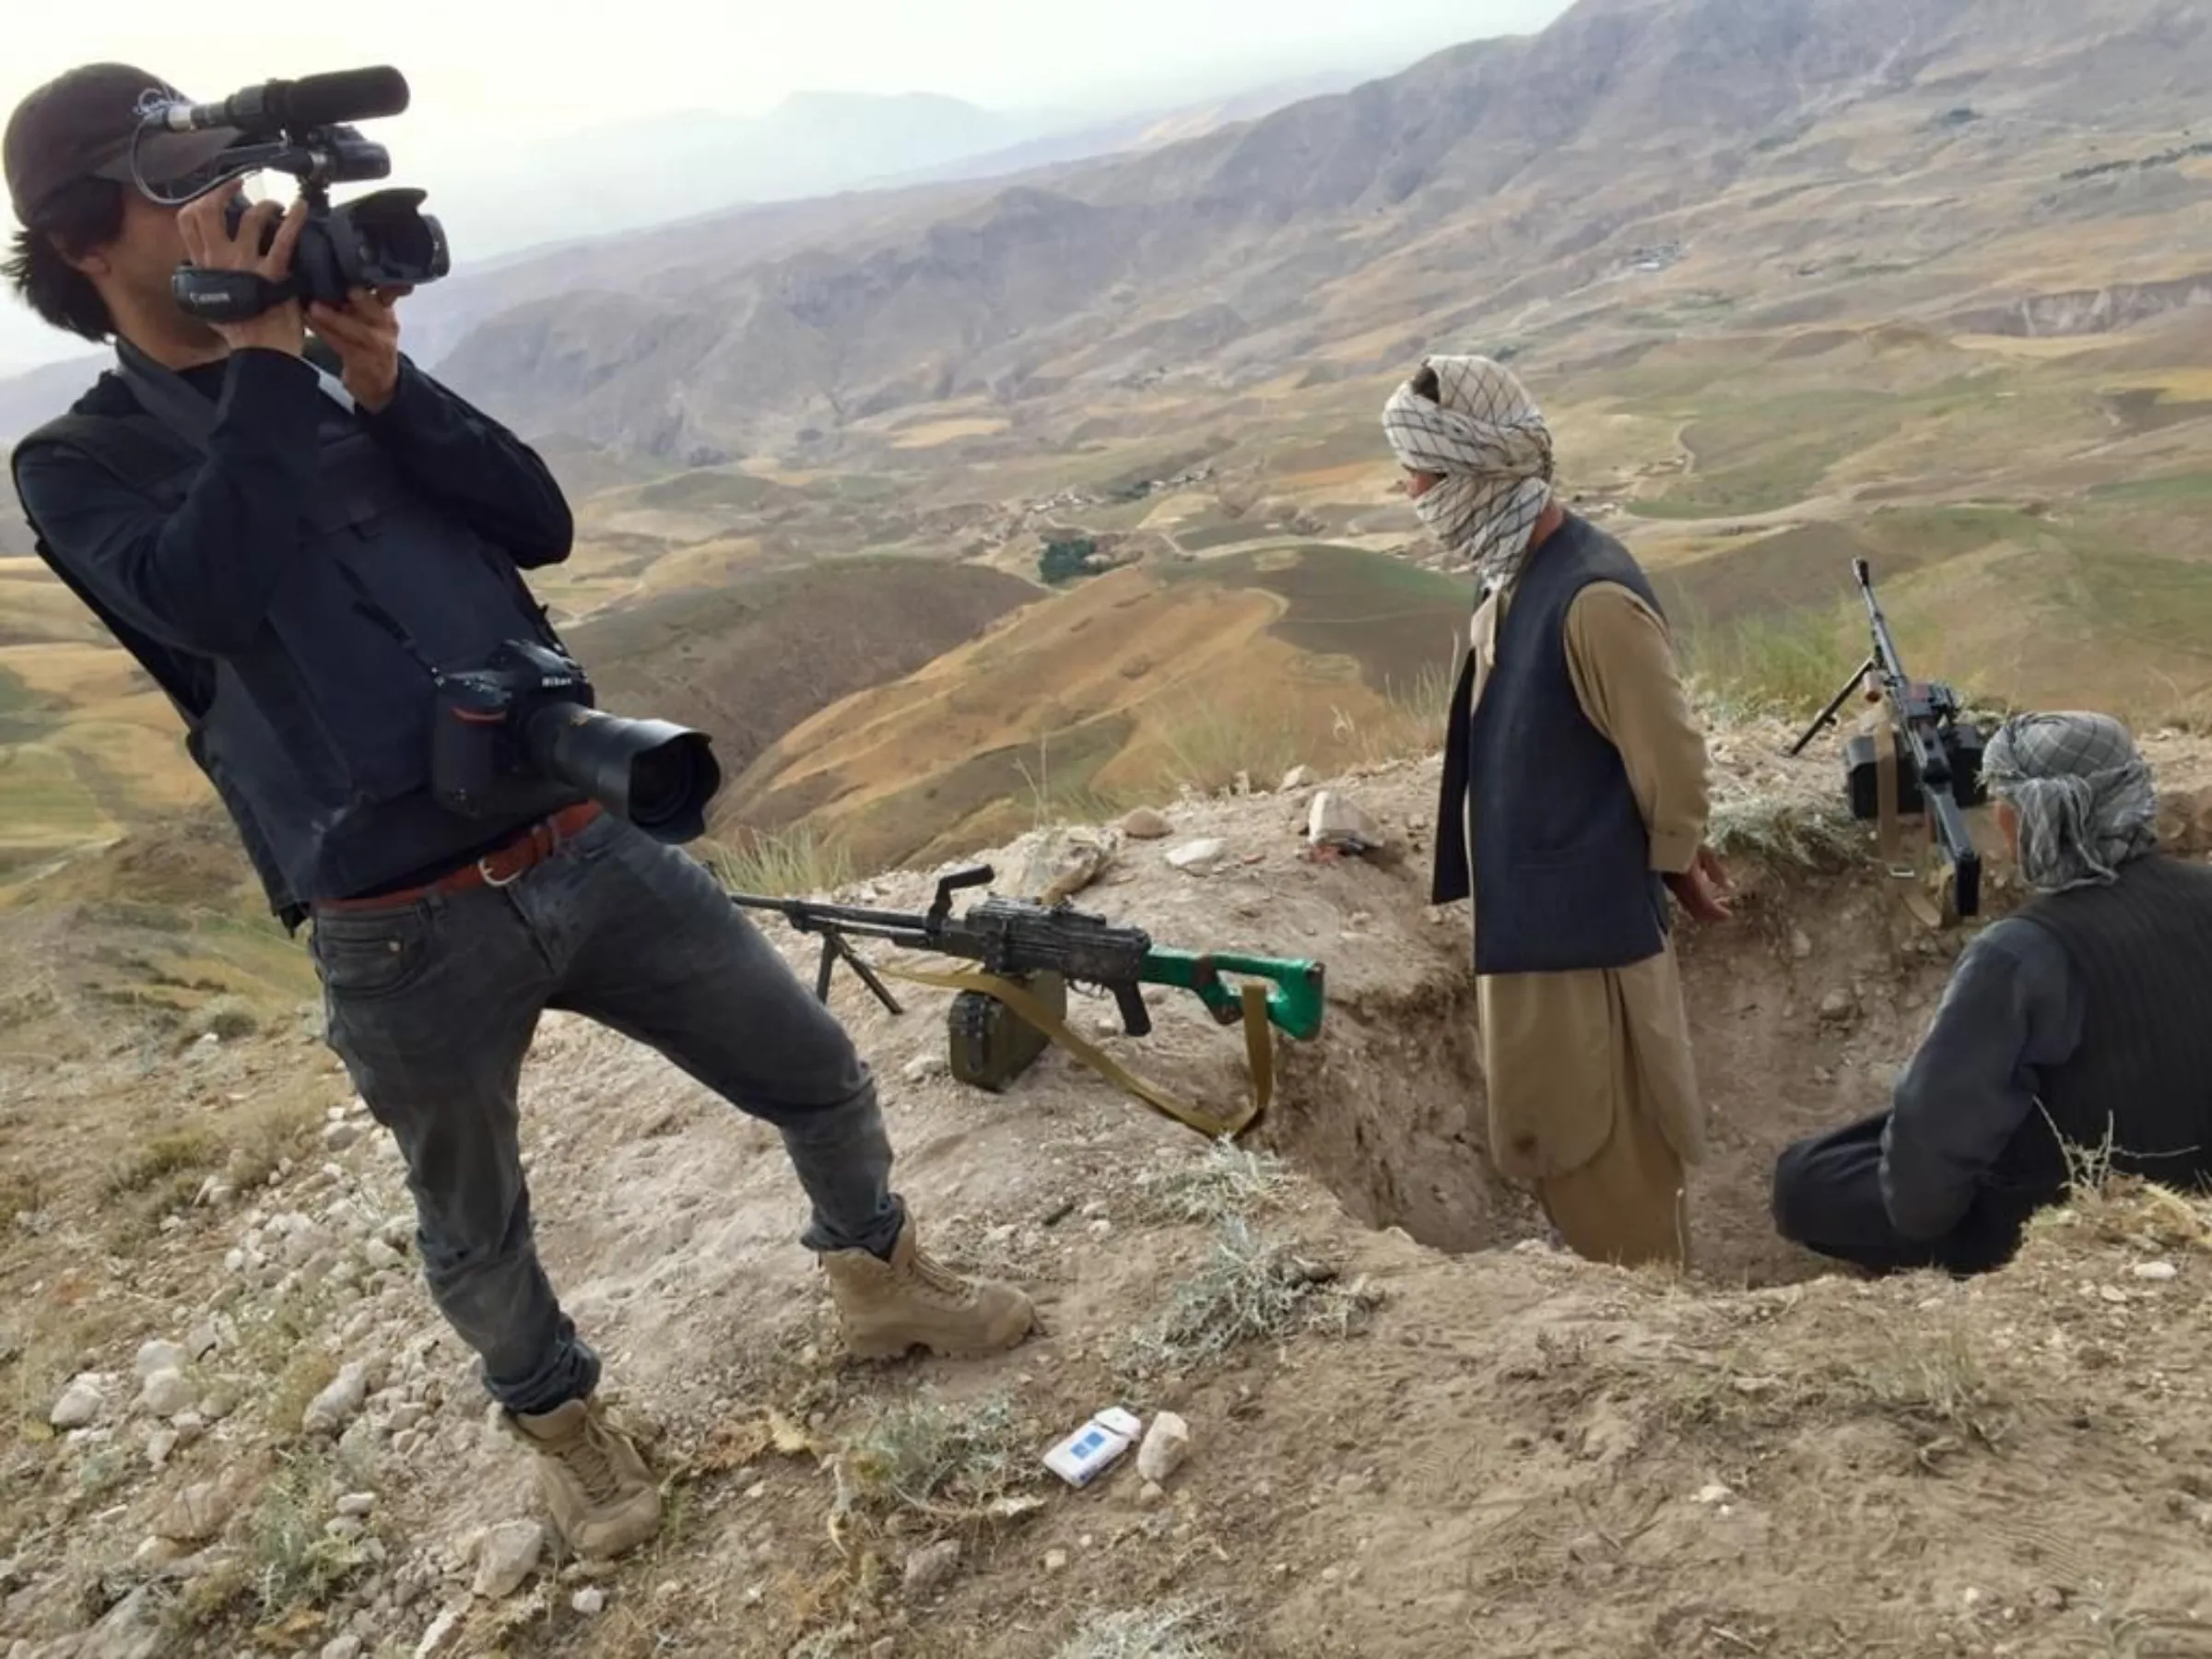 A man films Taliban forces who are watching out from a ditch in the ground, guns propped up